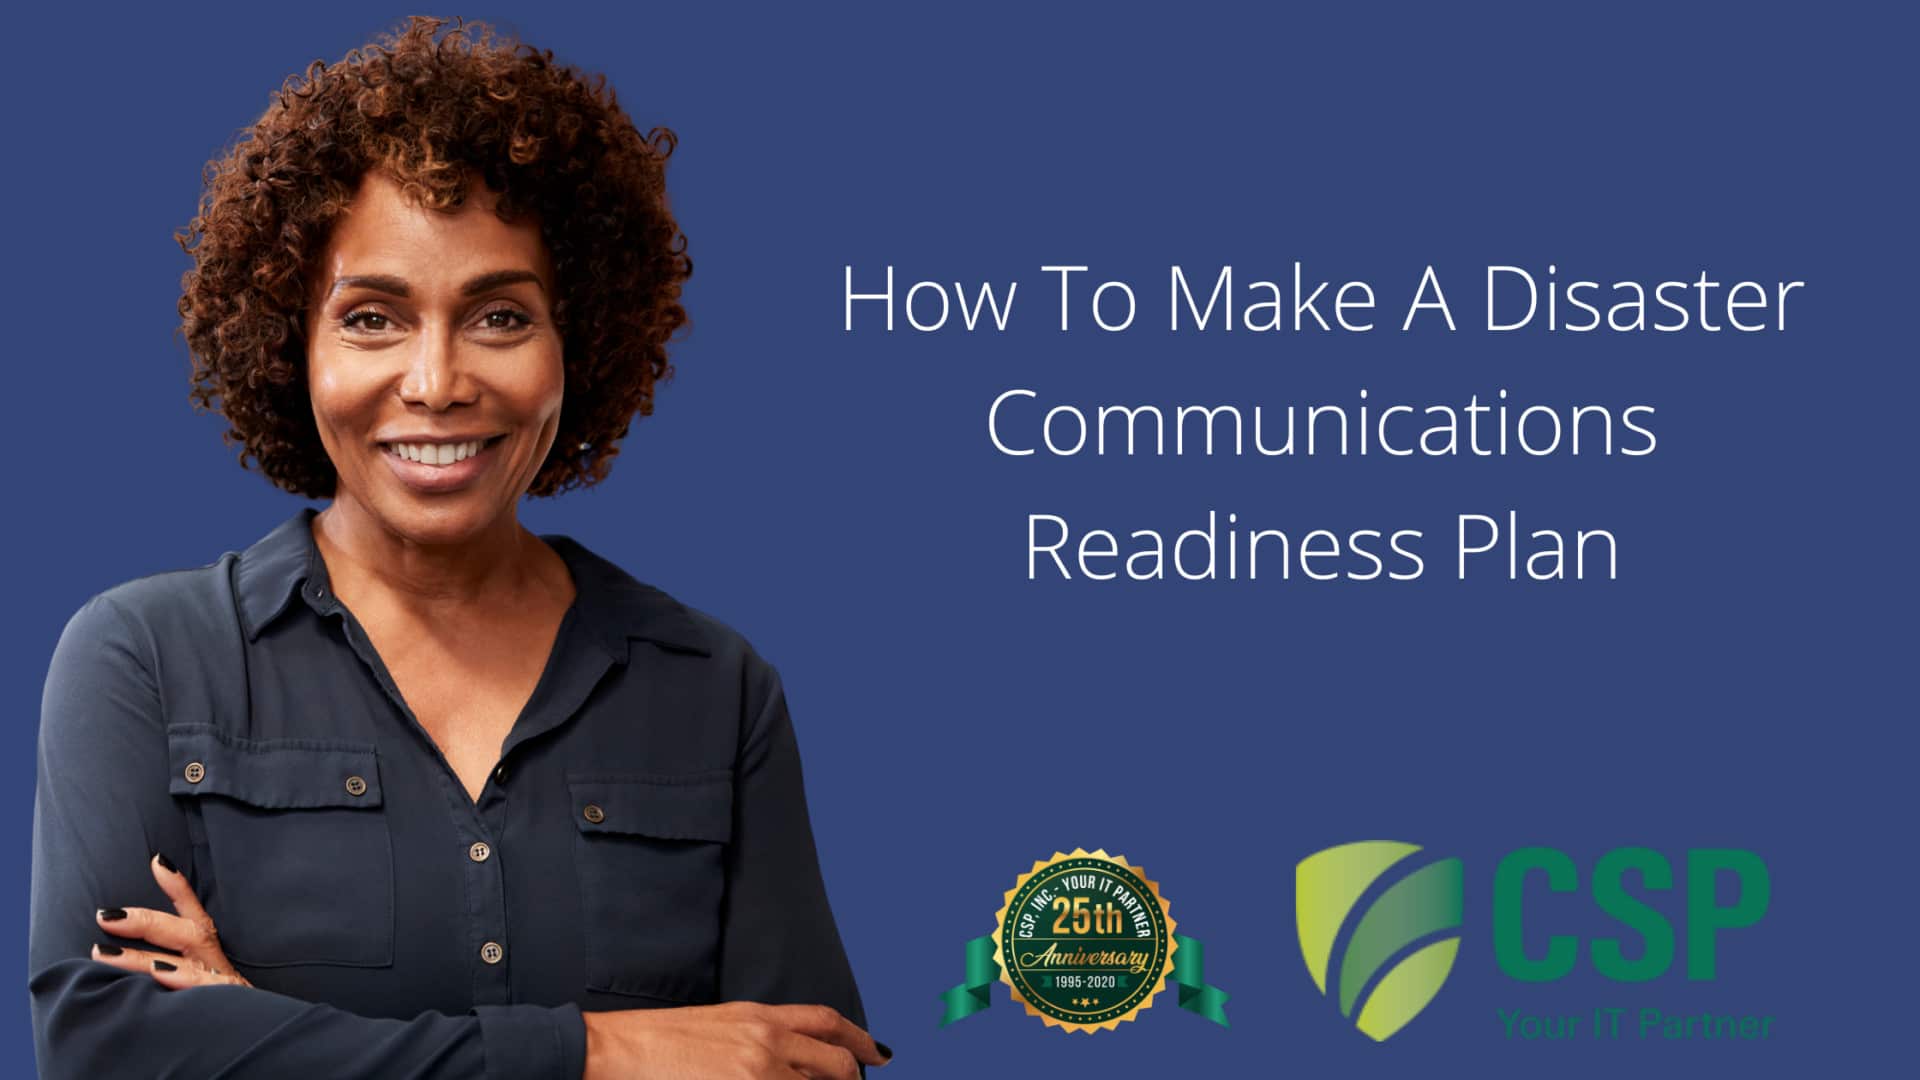 How To Make A Disaster Communications Readiness Plan